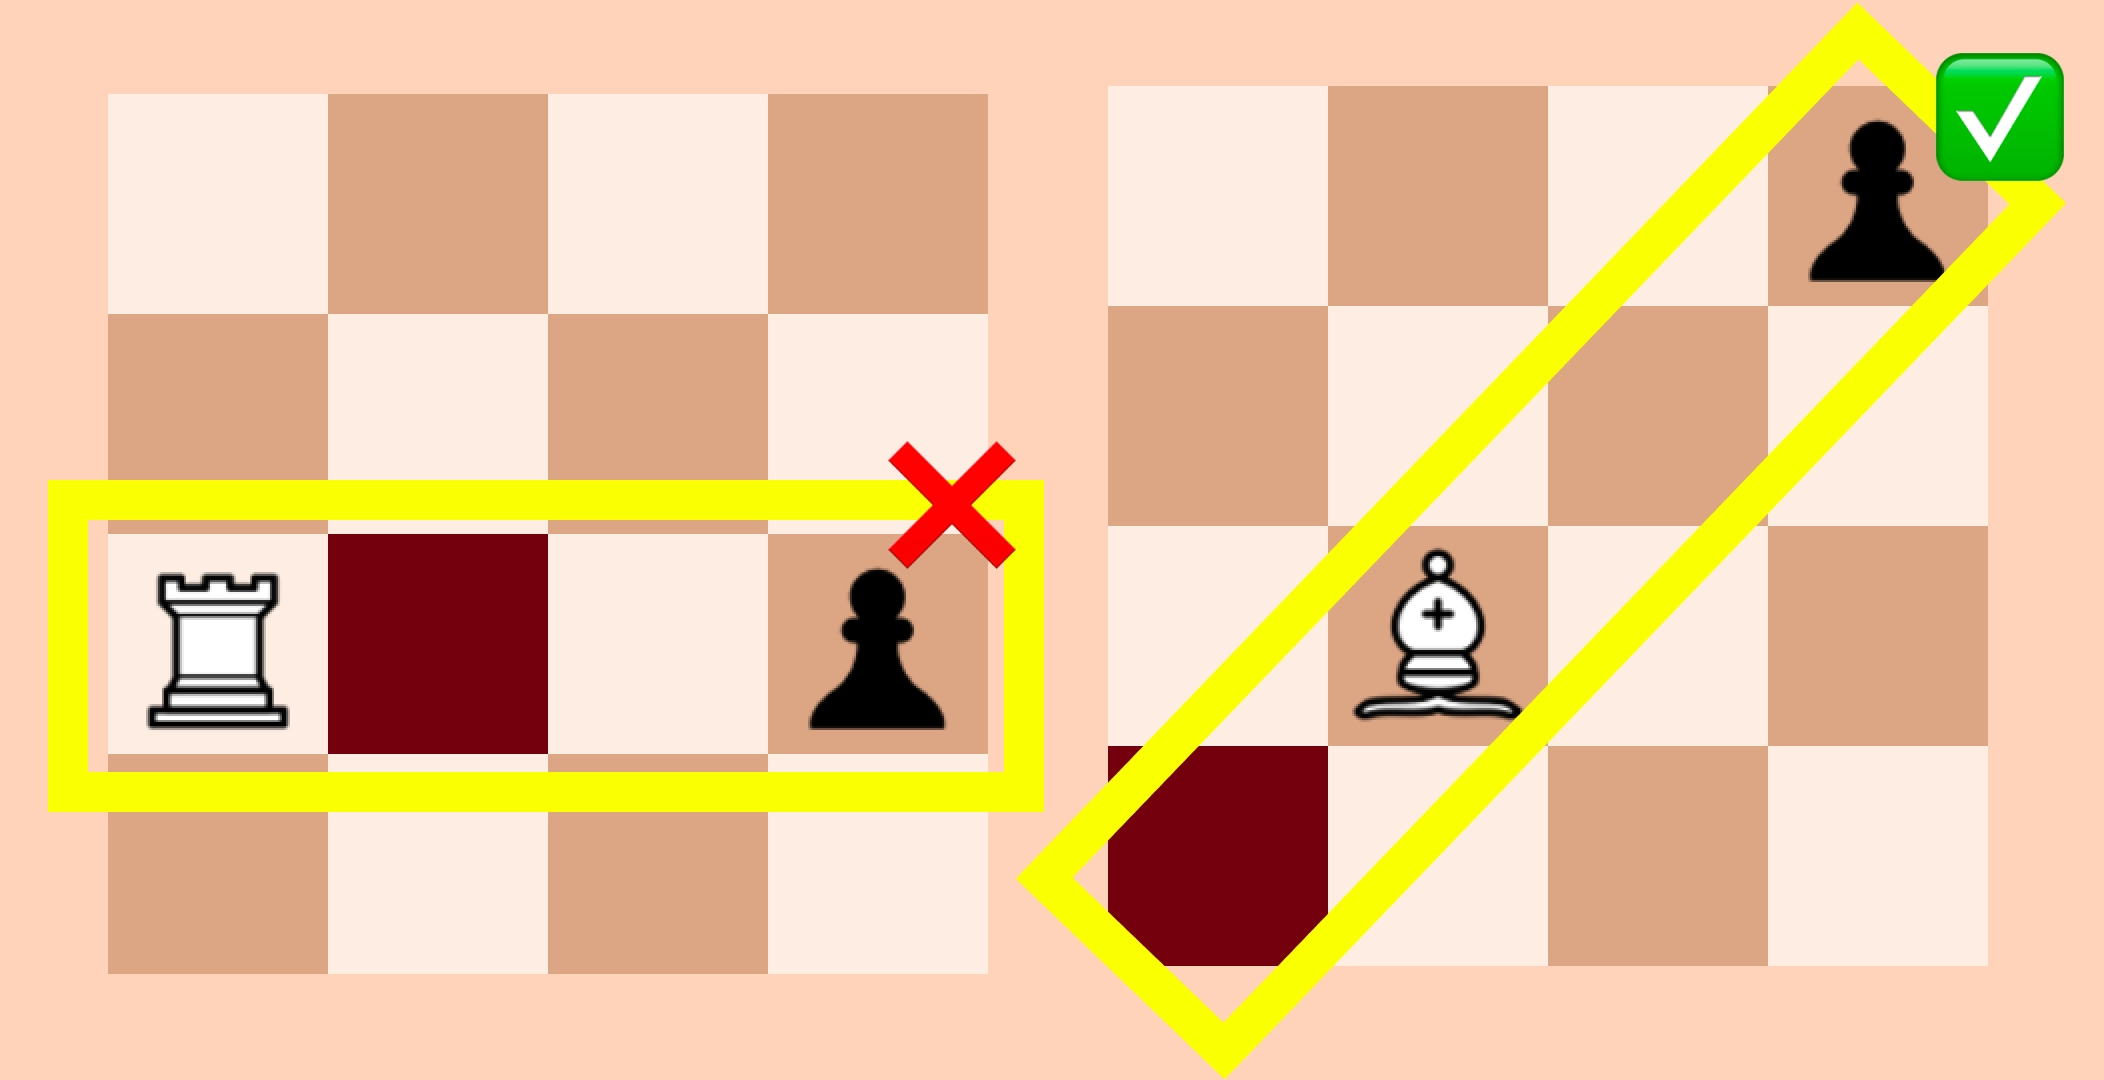 How to Play With a Friend on Lichess - The School Of Rook